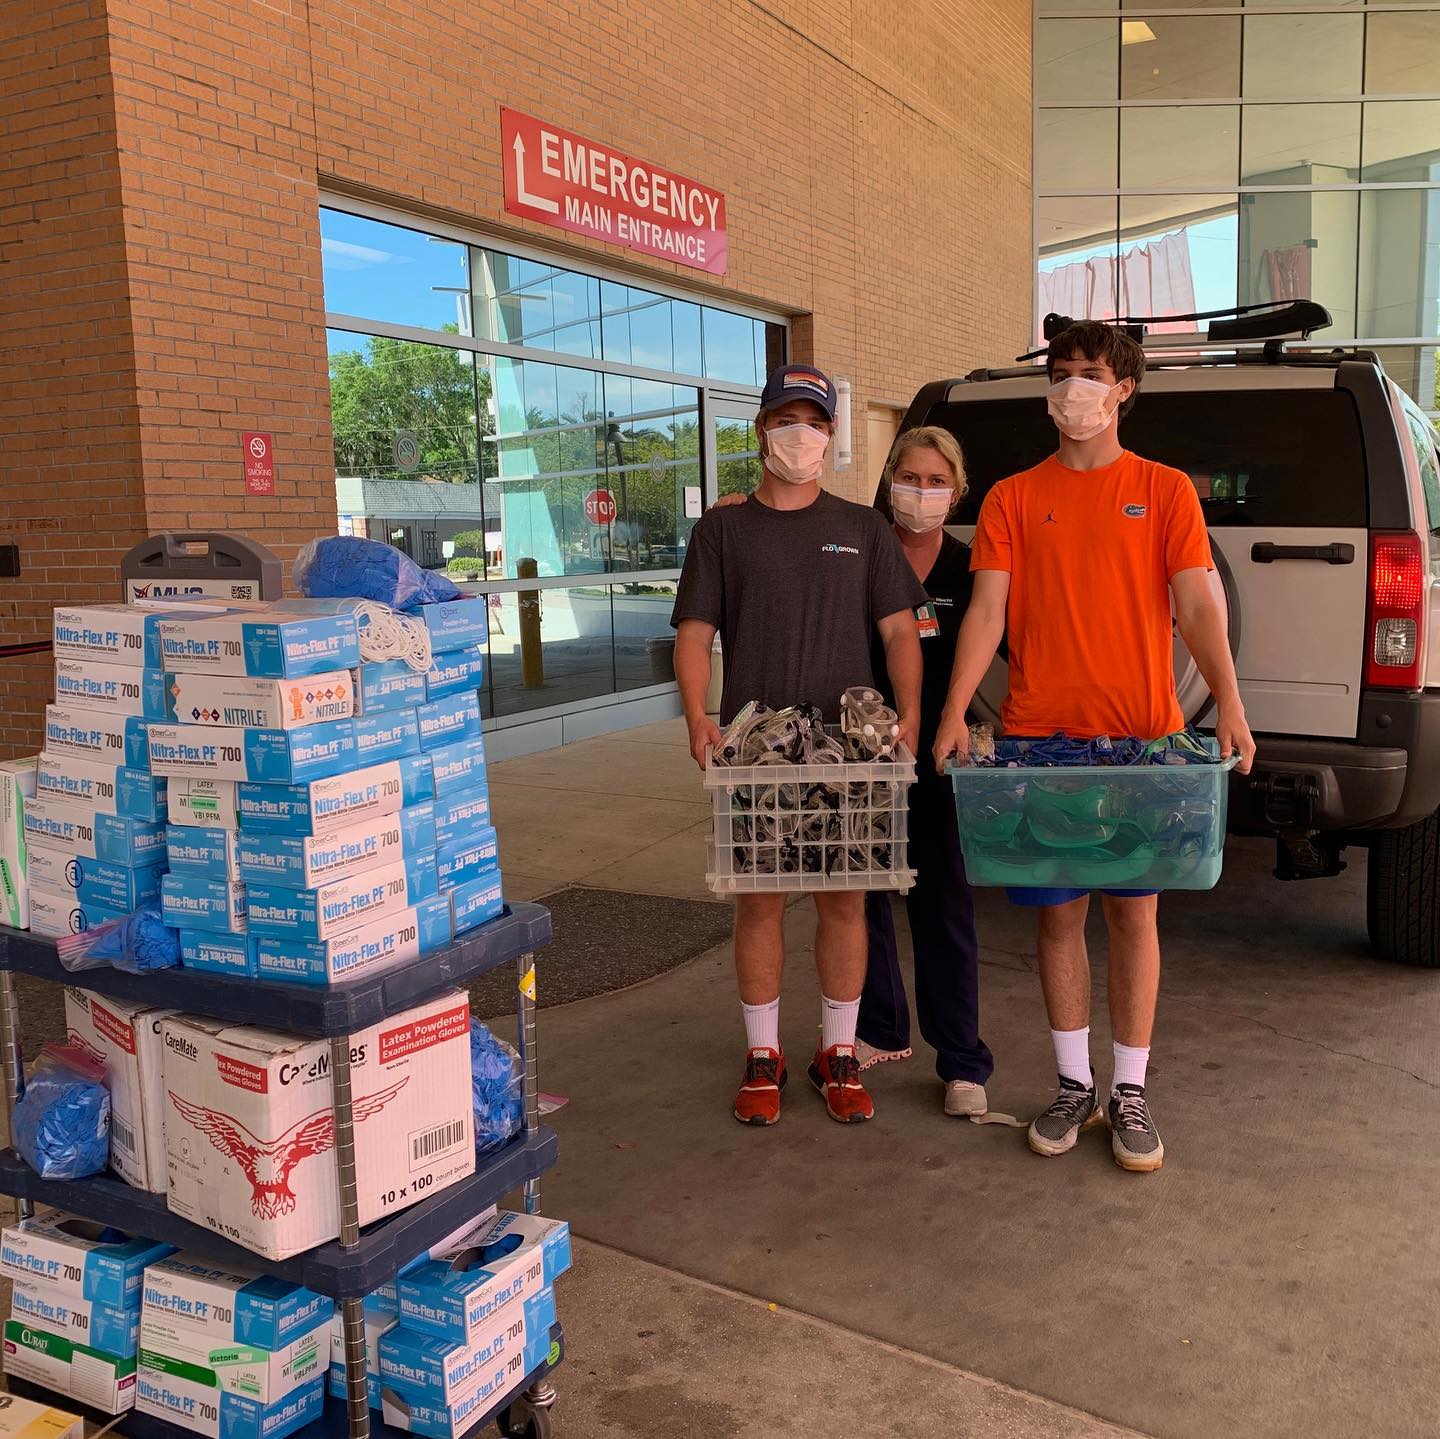 Image outside of hospital with supplies being donated